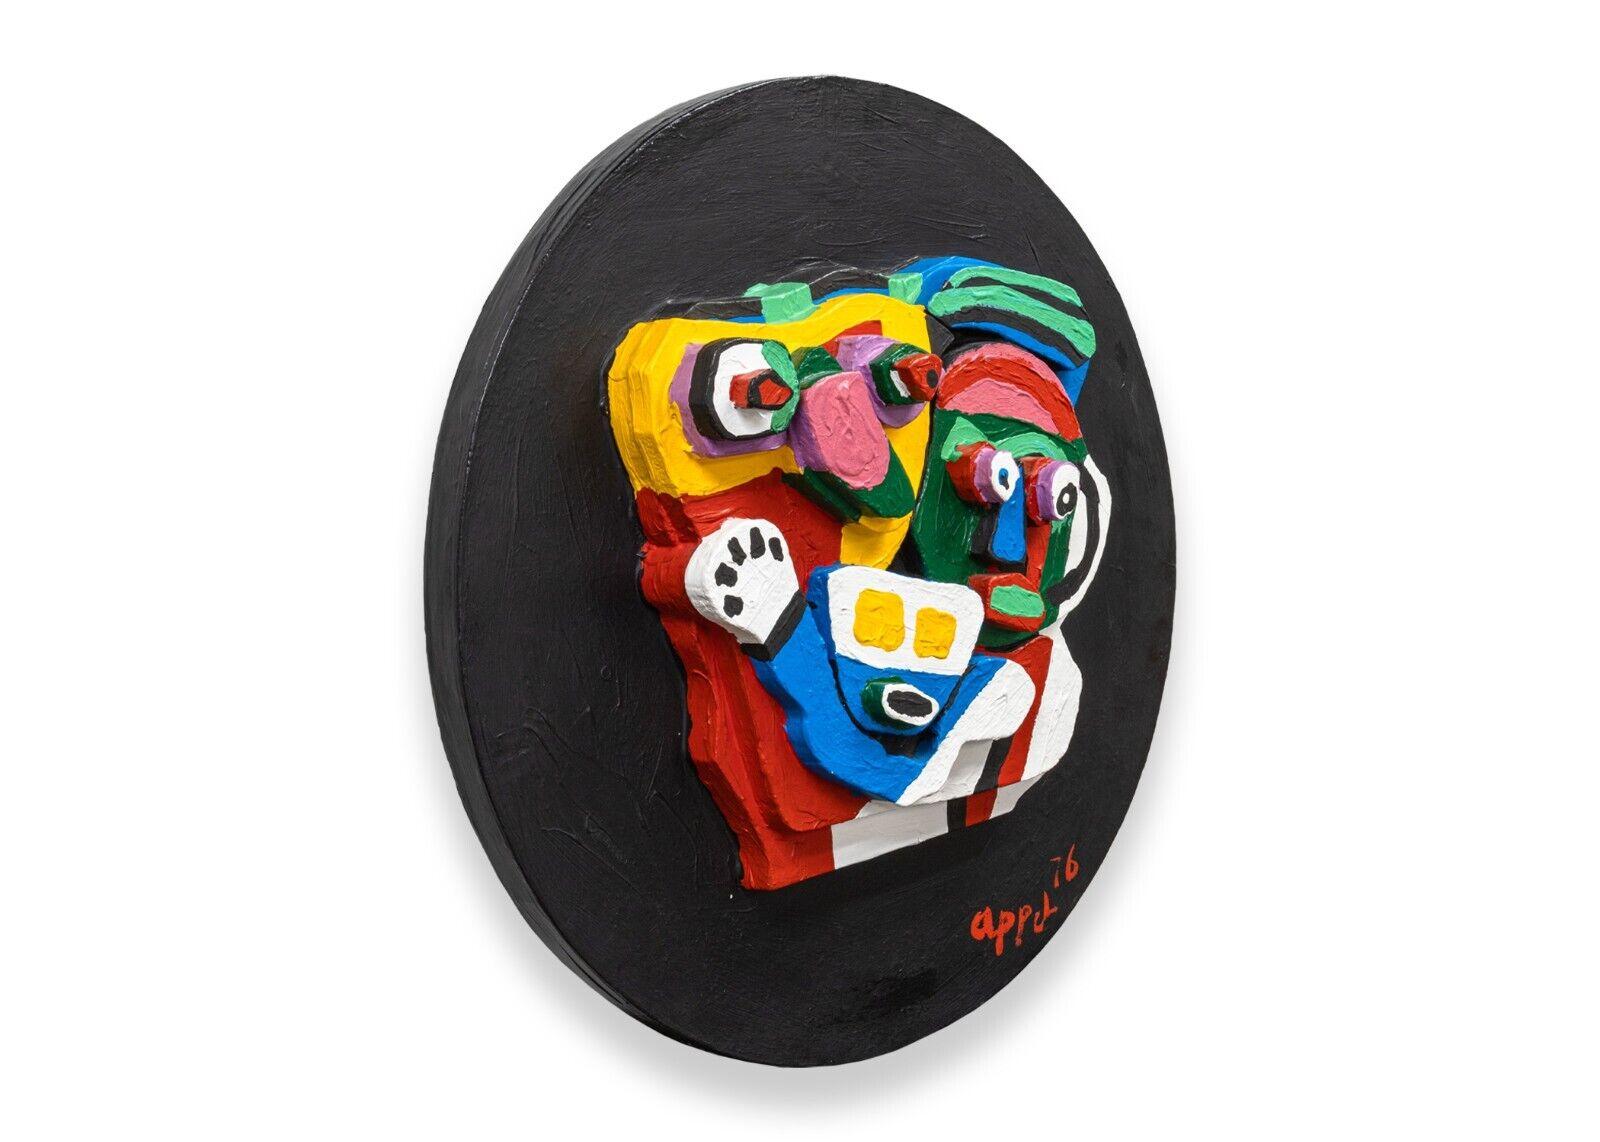 A whimsical hand-painted multiple stone sculpture titled 